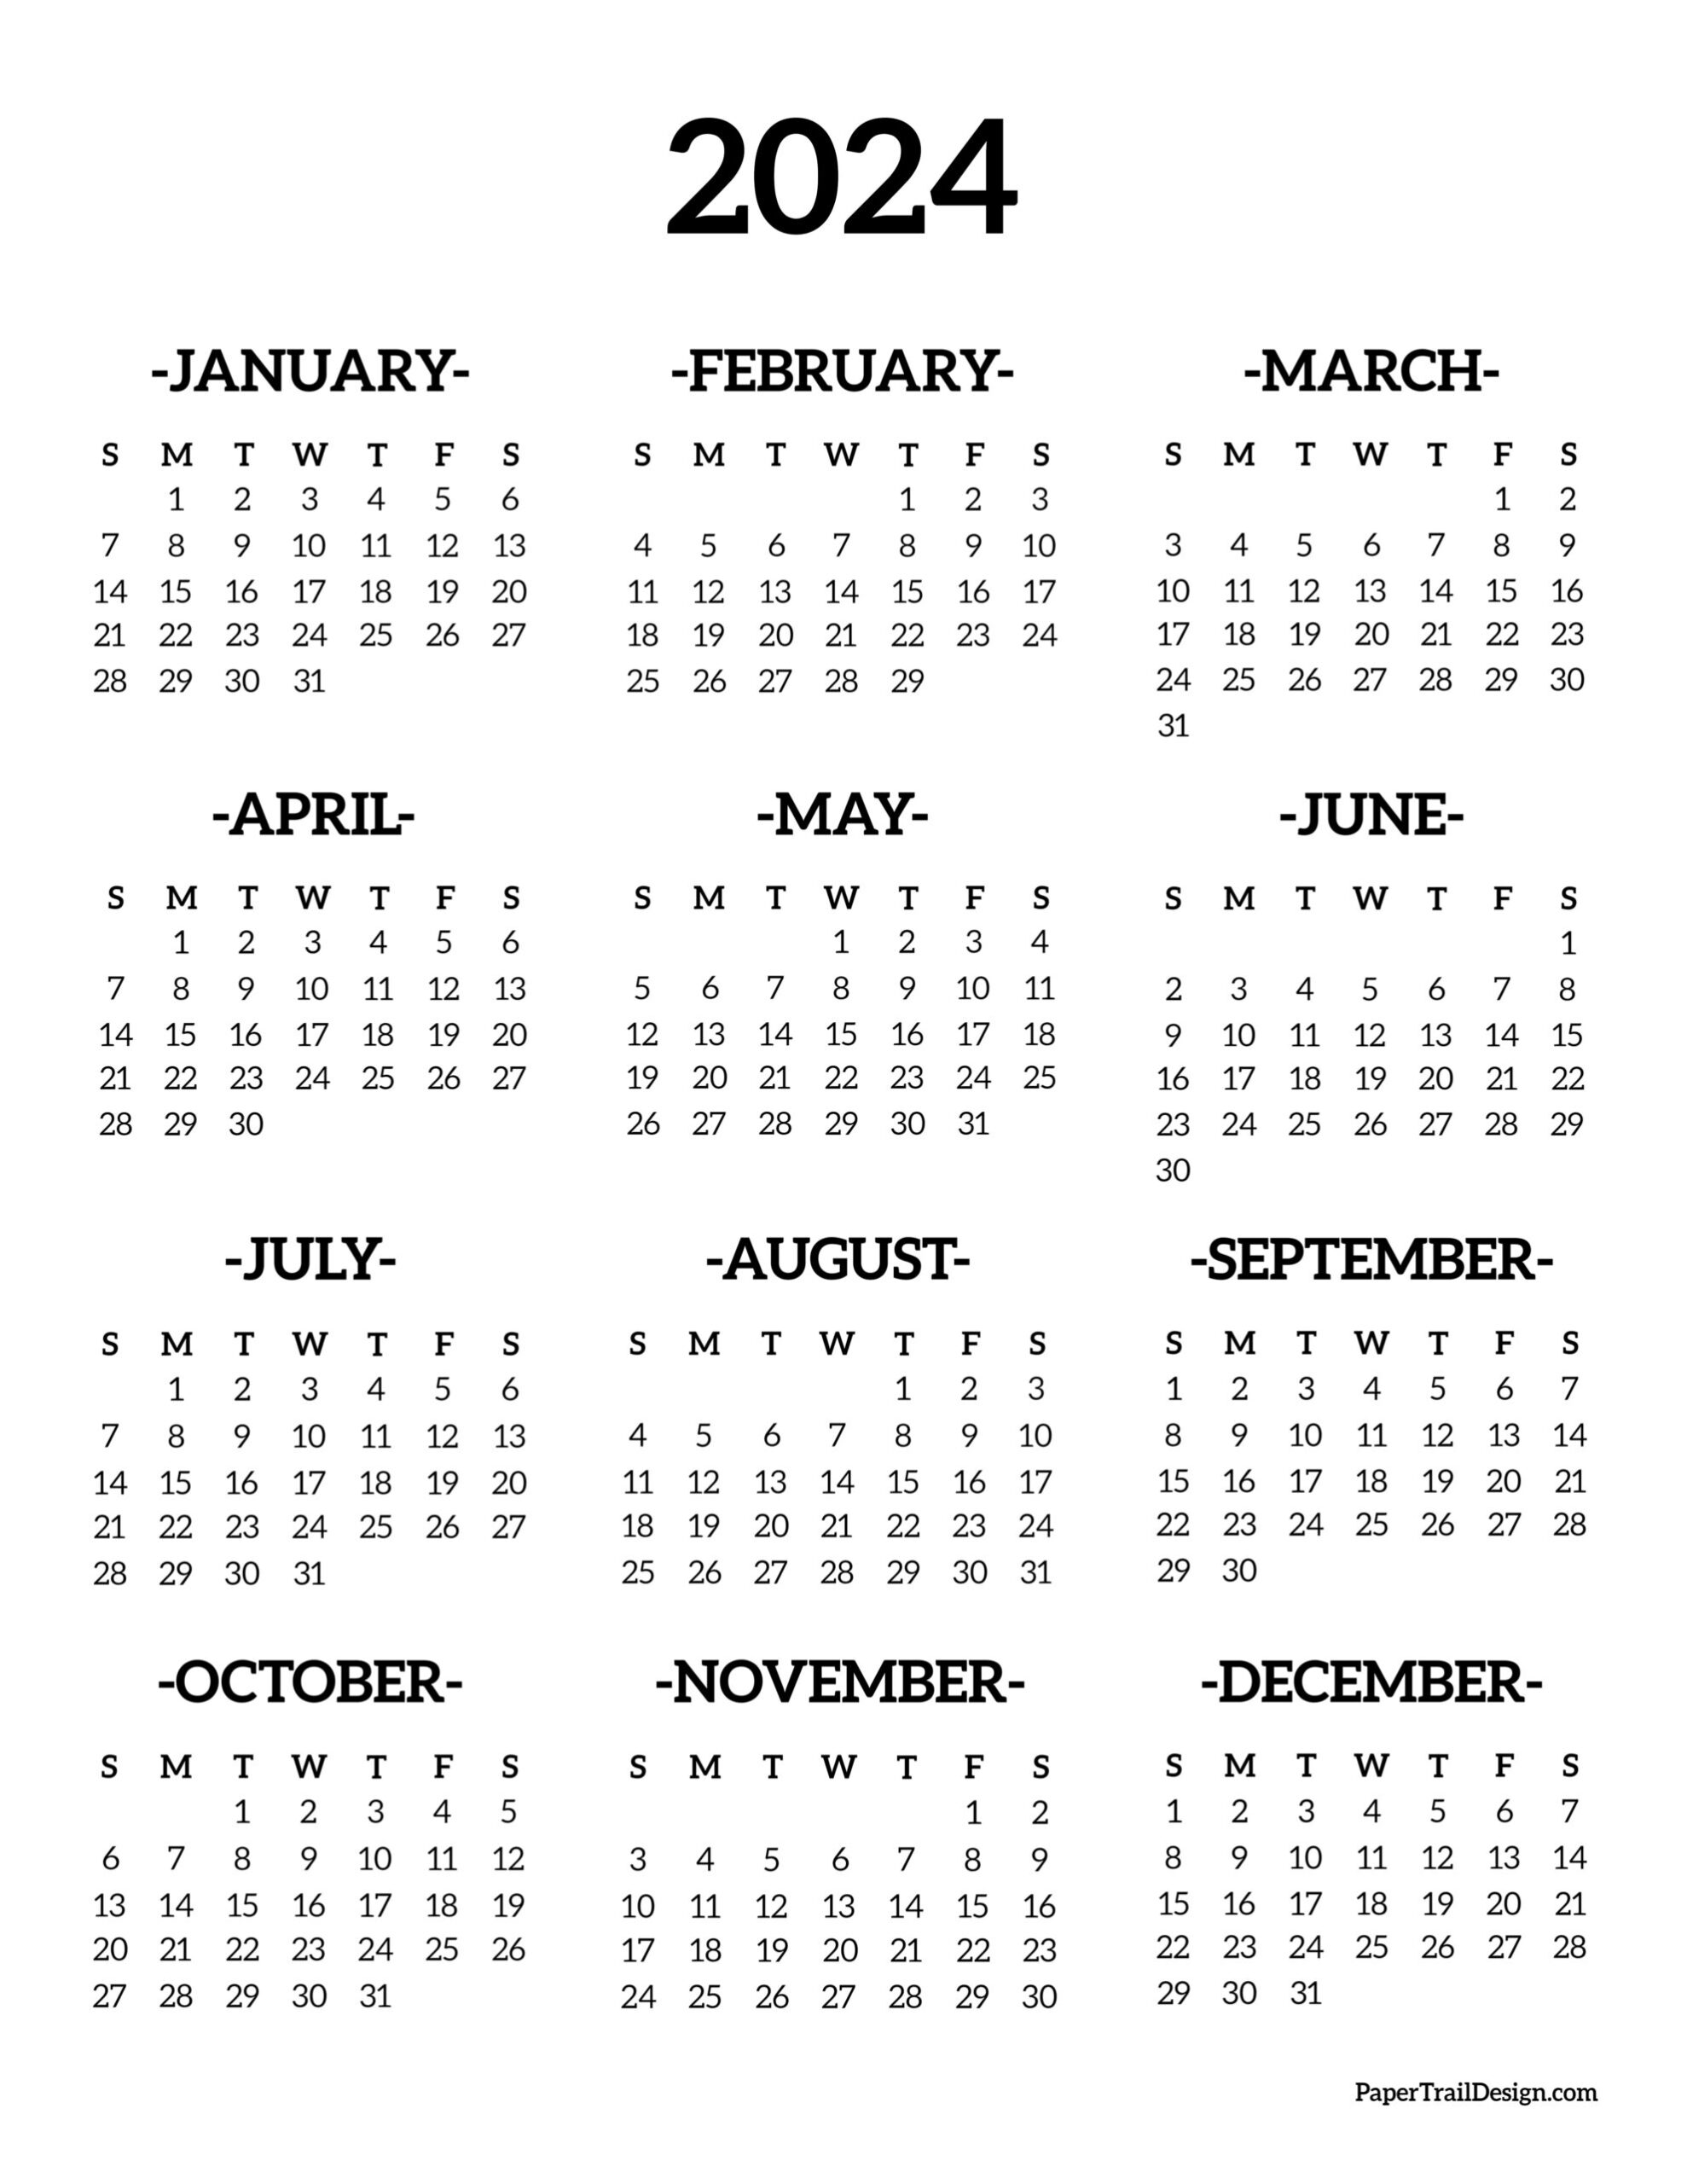 Calendar 2024 Printable One Page - Paper Trail Design for Free Printable Year Calendar 2024